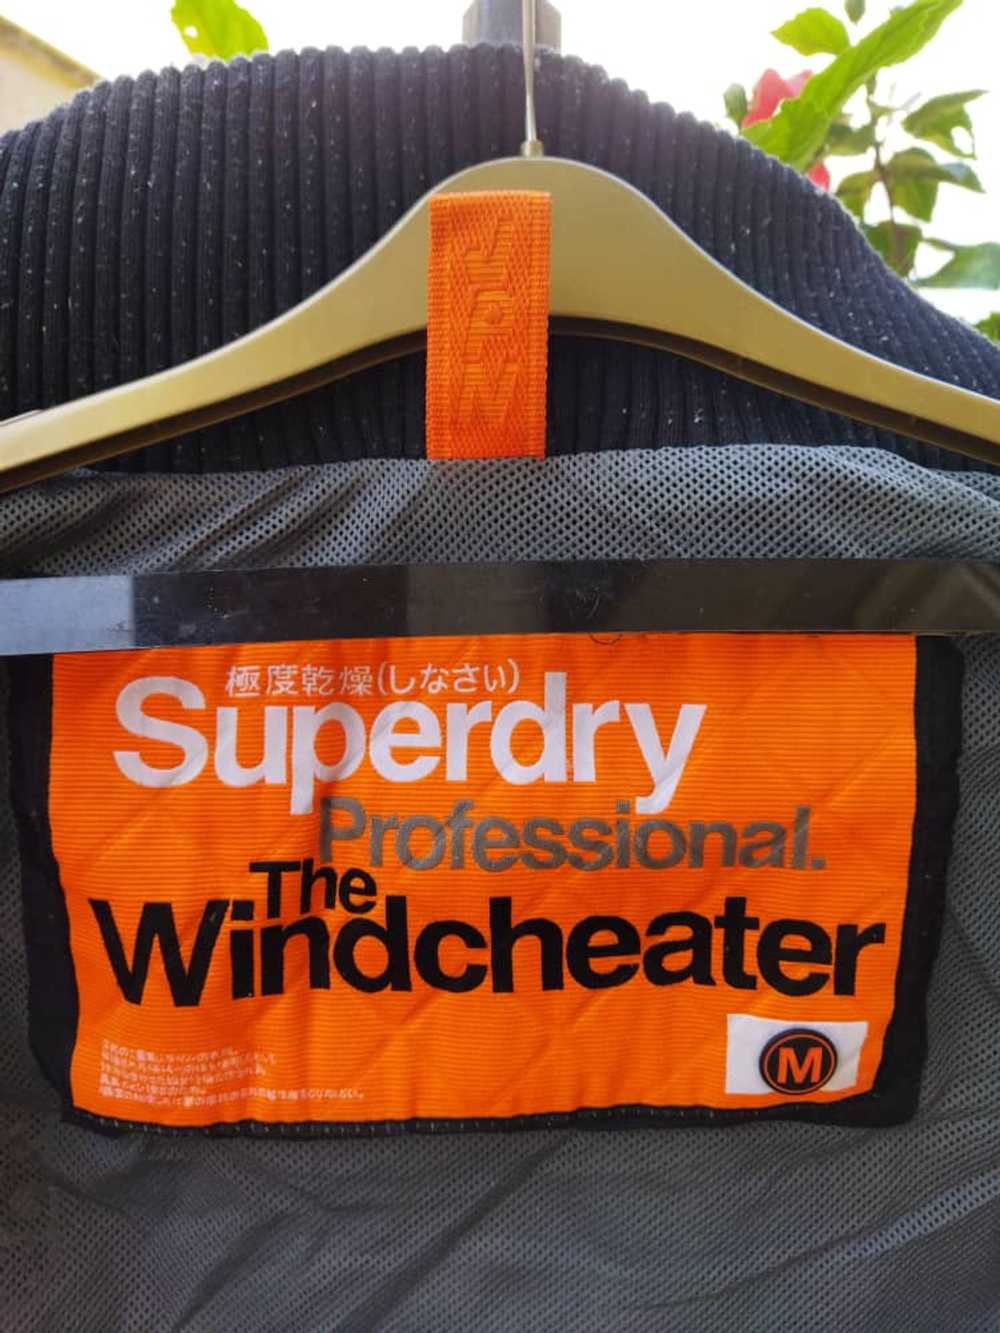 Superdry - SUPERDRY PROFESSIONAL THE WINDCHEATER - image 2